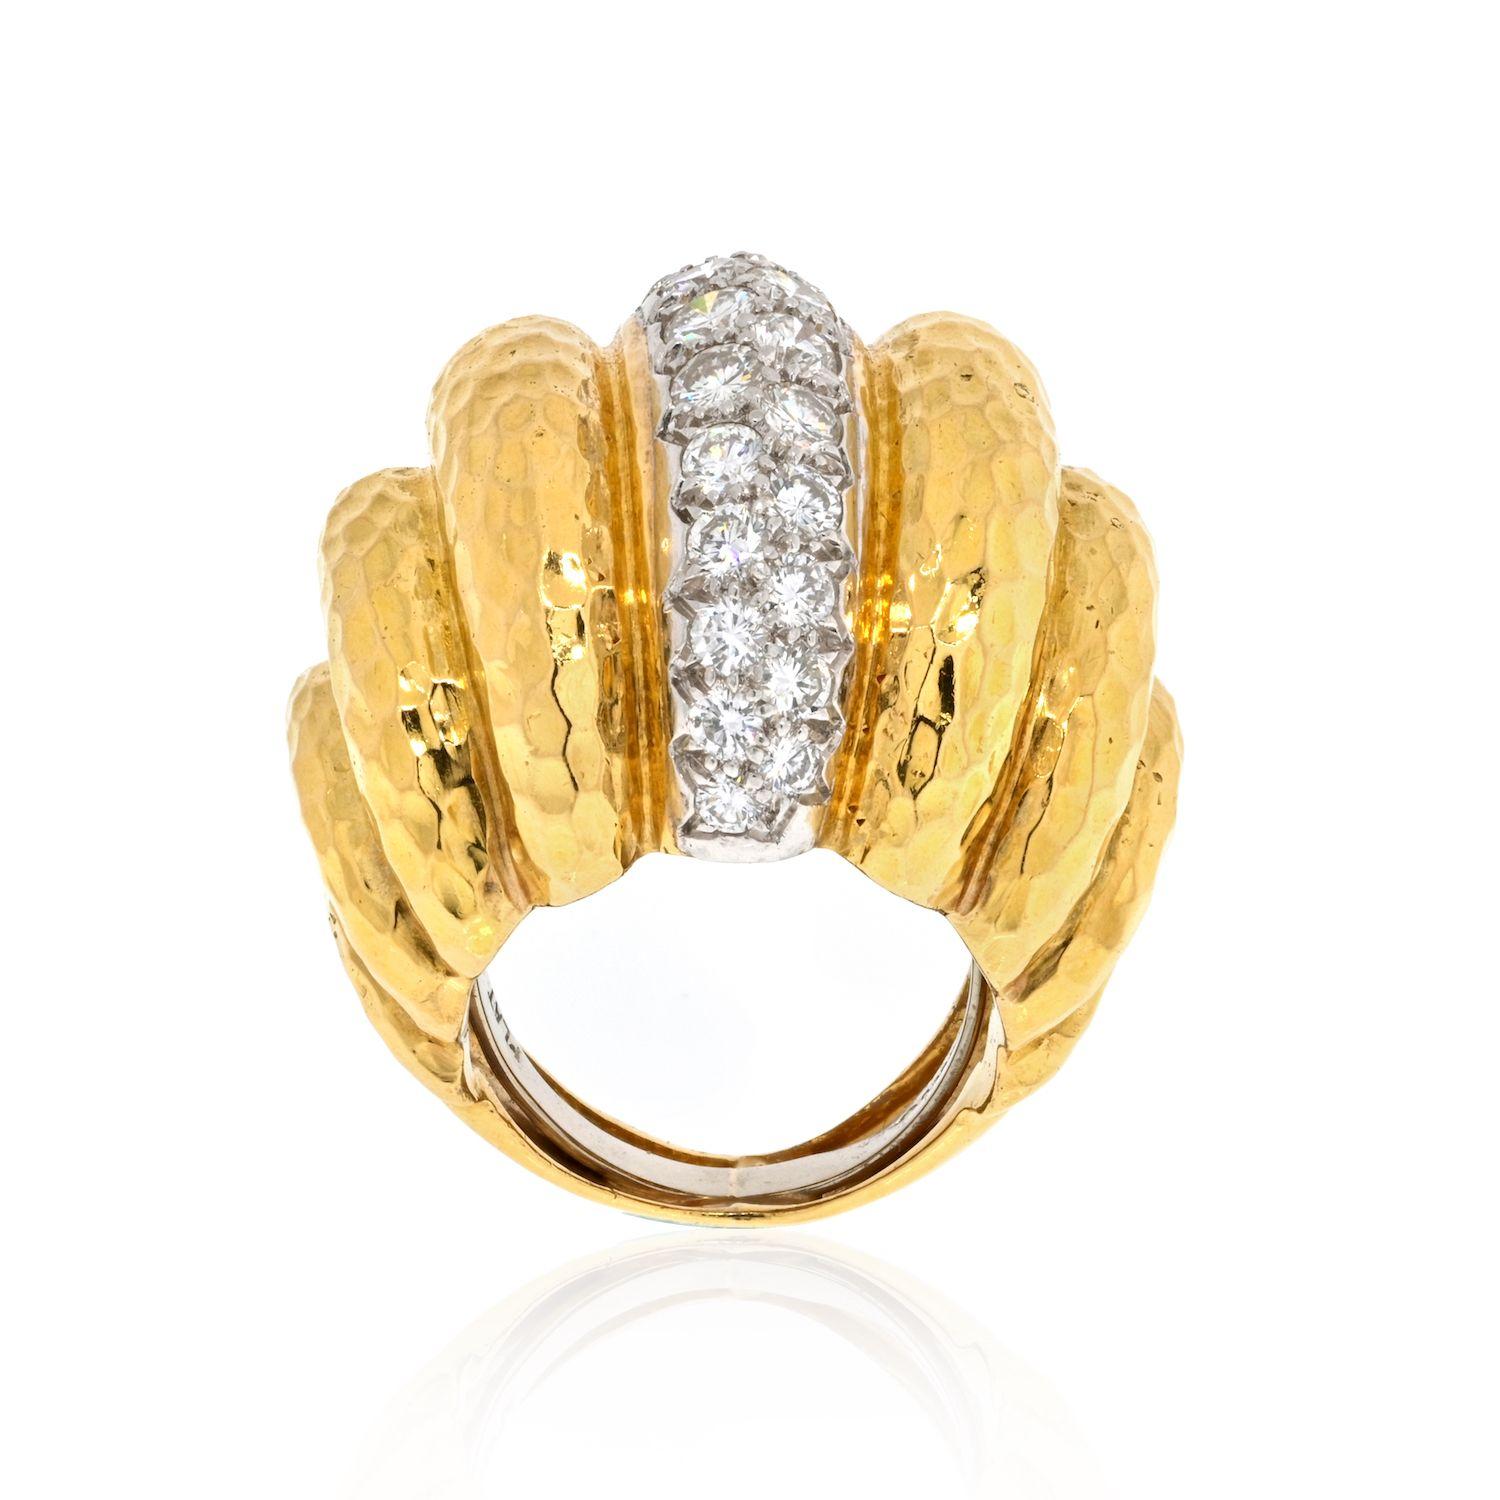 This is a fluted cocktail ring by David Webb in hammered 18k yellow gold, signed 